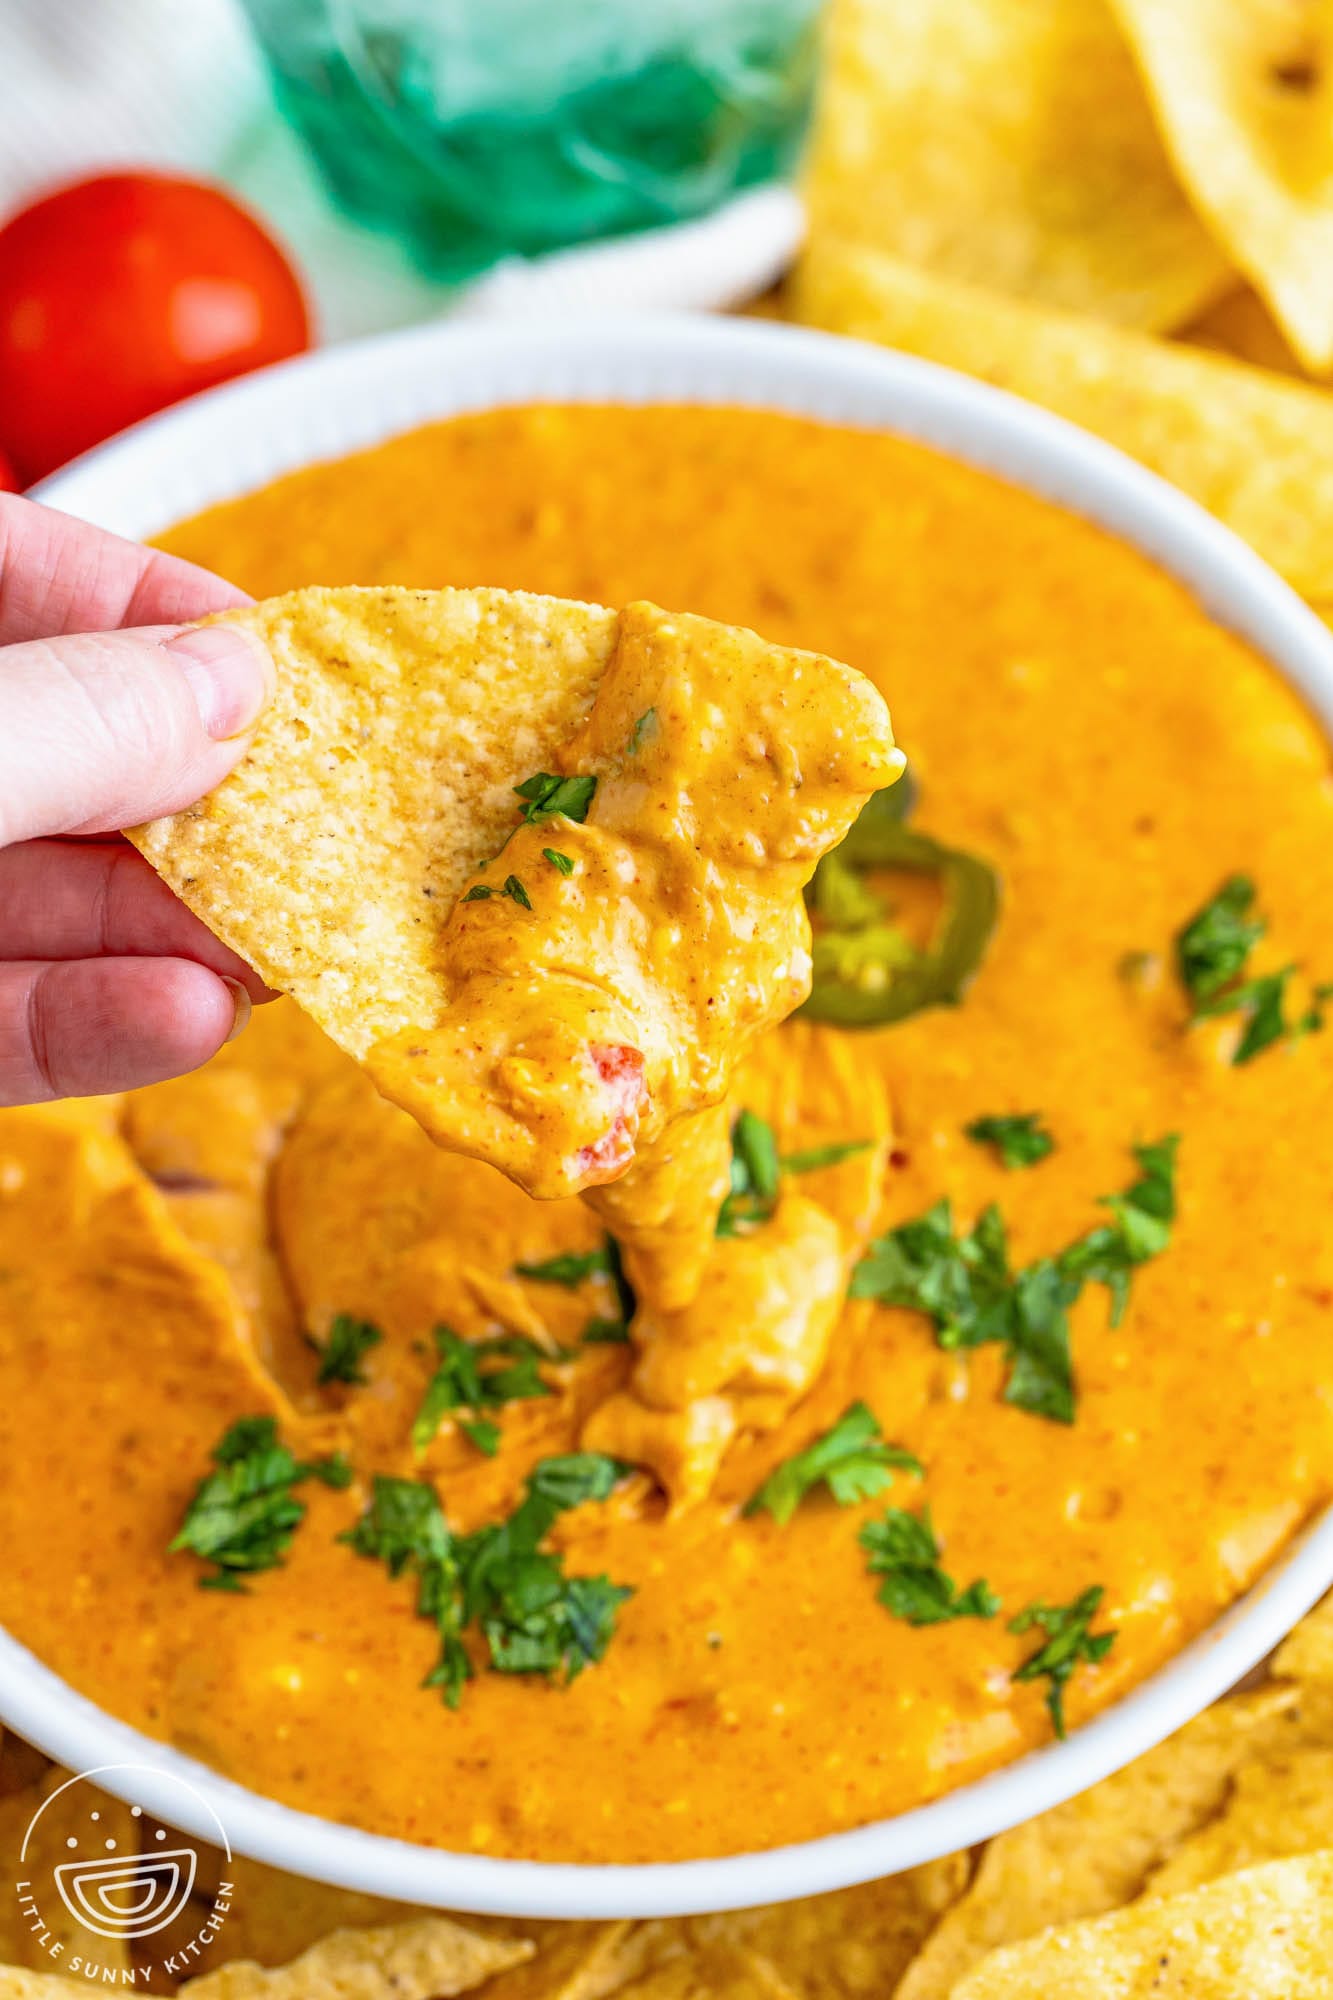 a hand holding a tortilla chip dipped in queso, over a bowl of queso.